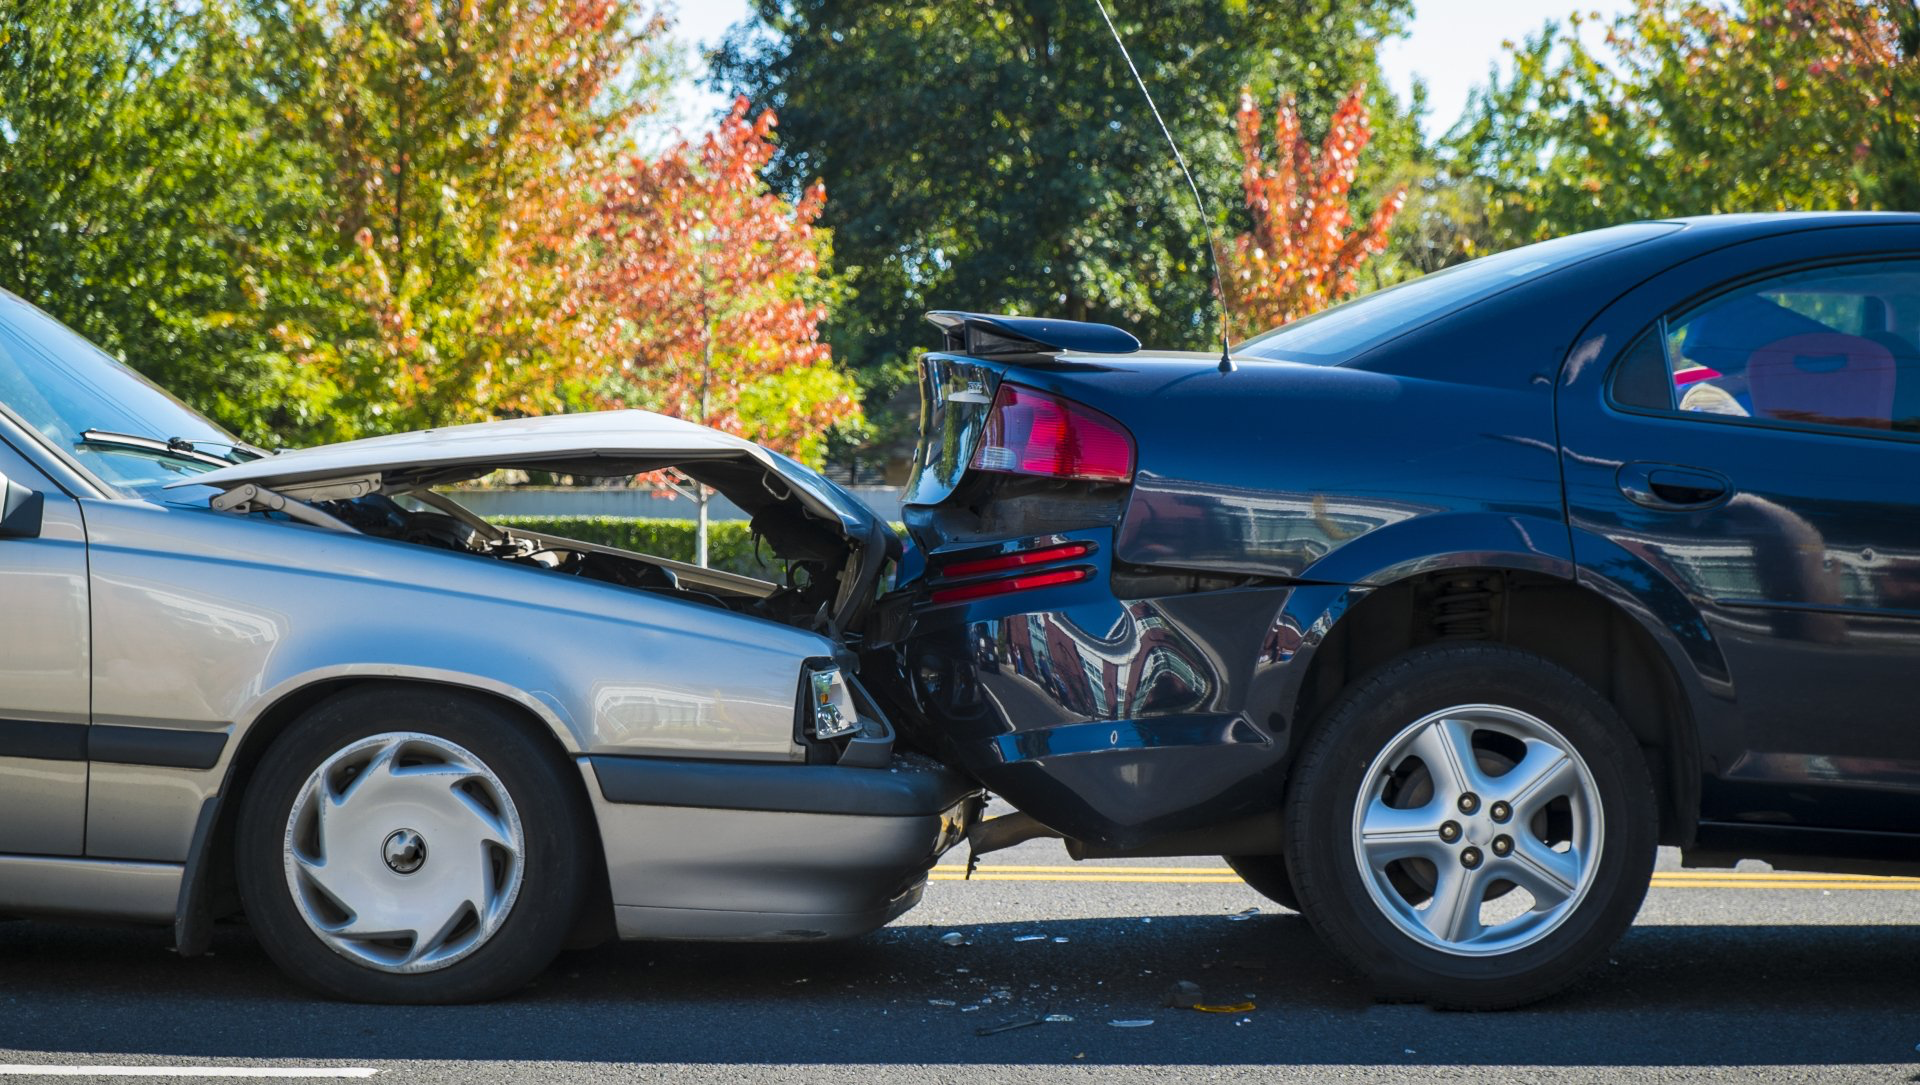 Should You Accept a Car Accident Insurance Offer?